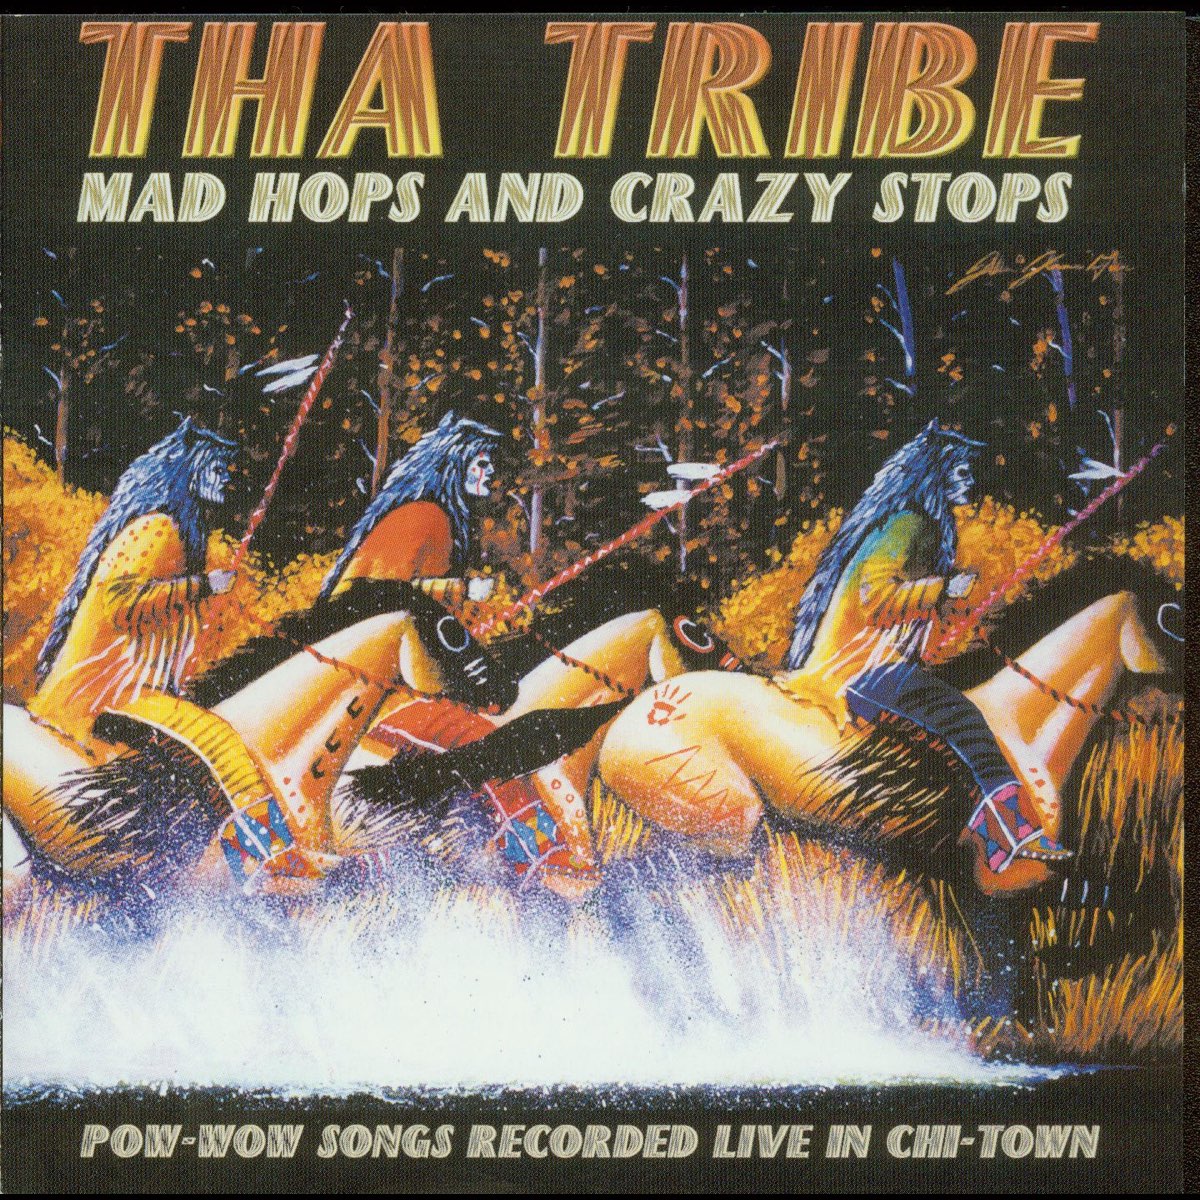 Mad Tribe. Wow wow wow песня. Crazy Town Butterfly обложка. The Dance of the Crow. Песня tribes